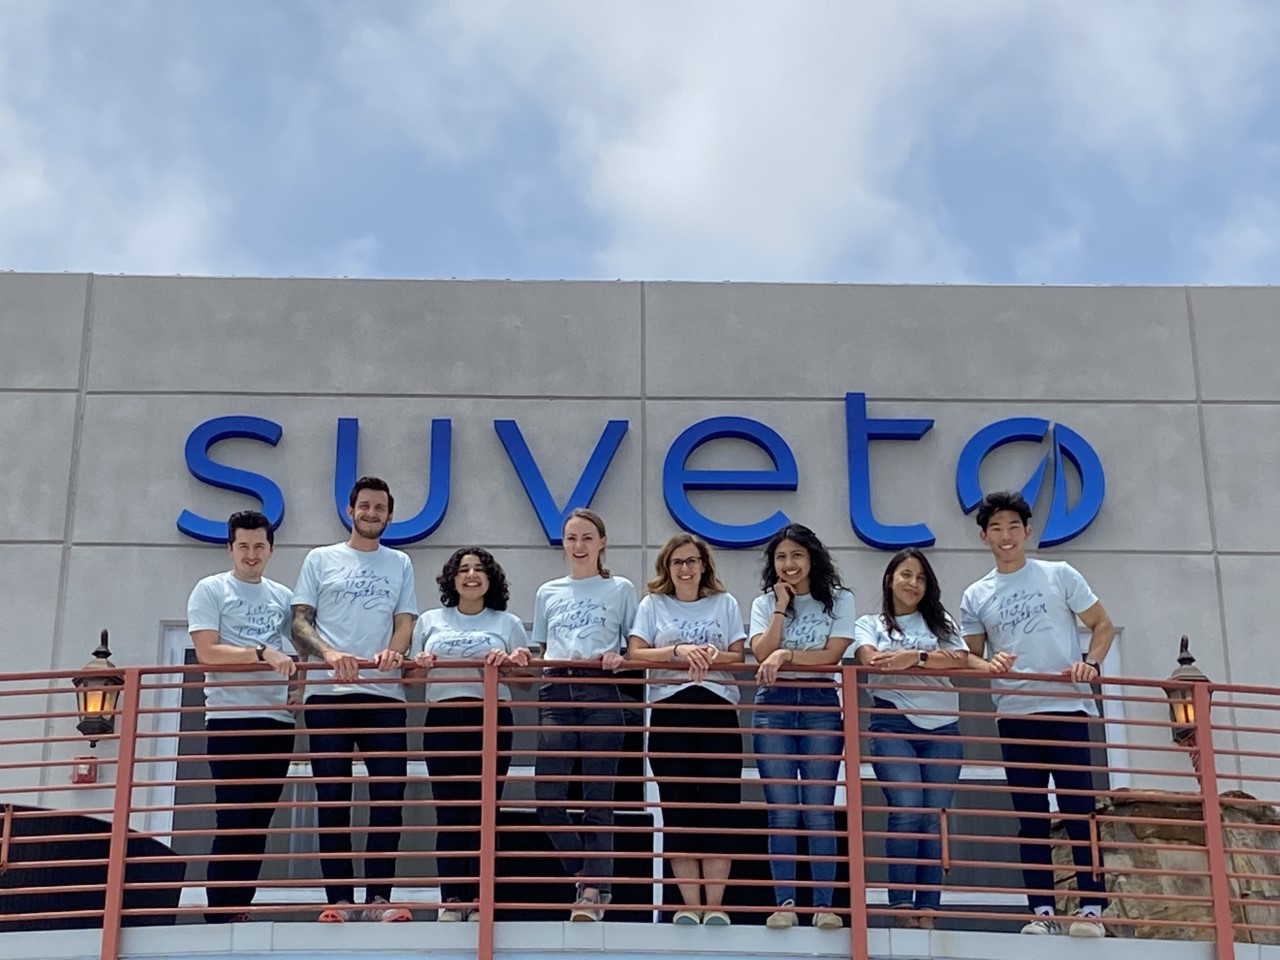 Suveto launches Let’s Move Together challenge to support NOMV